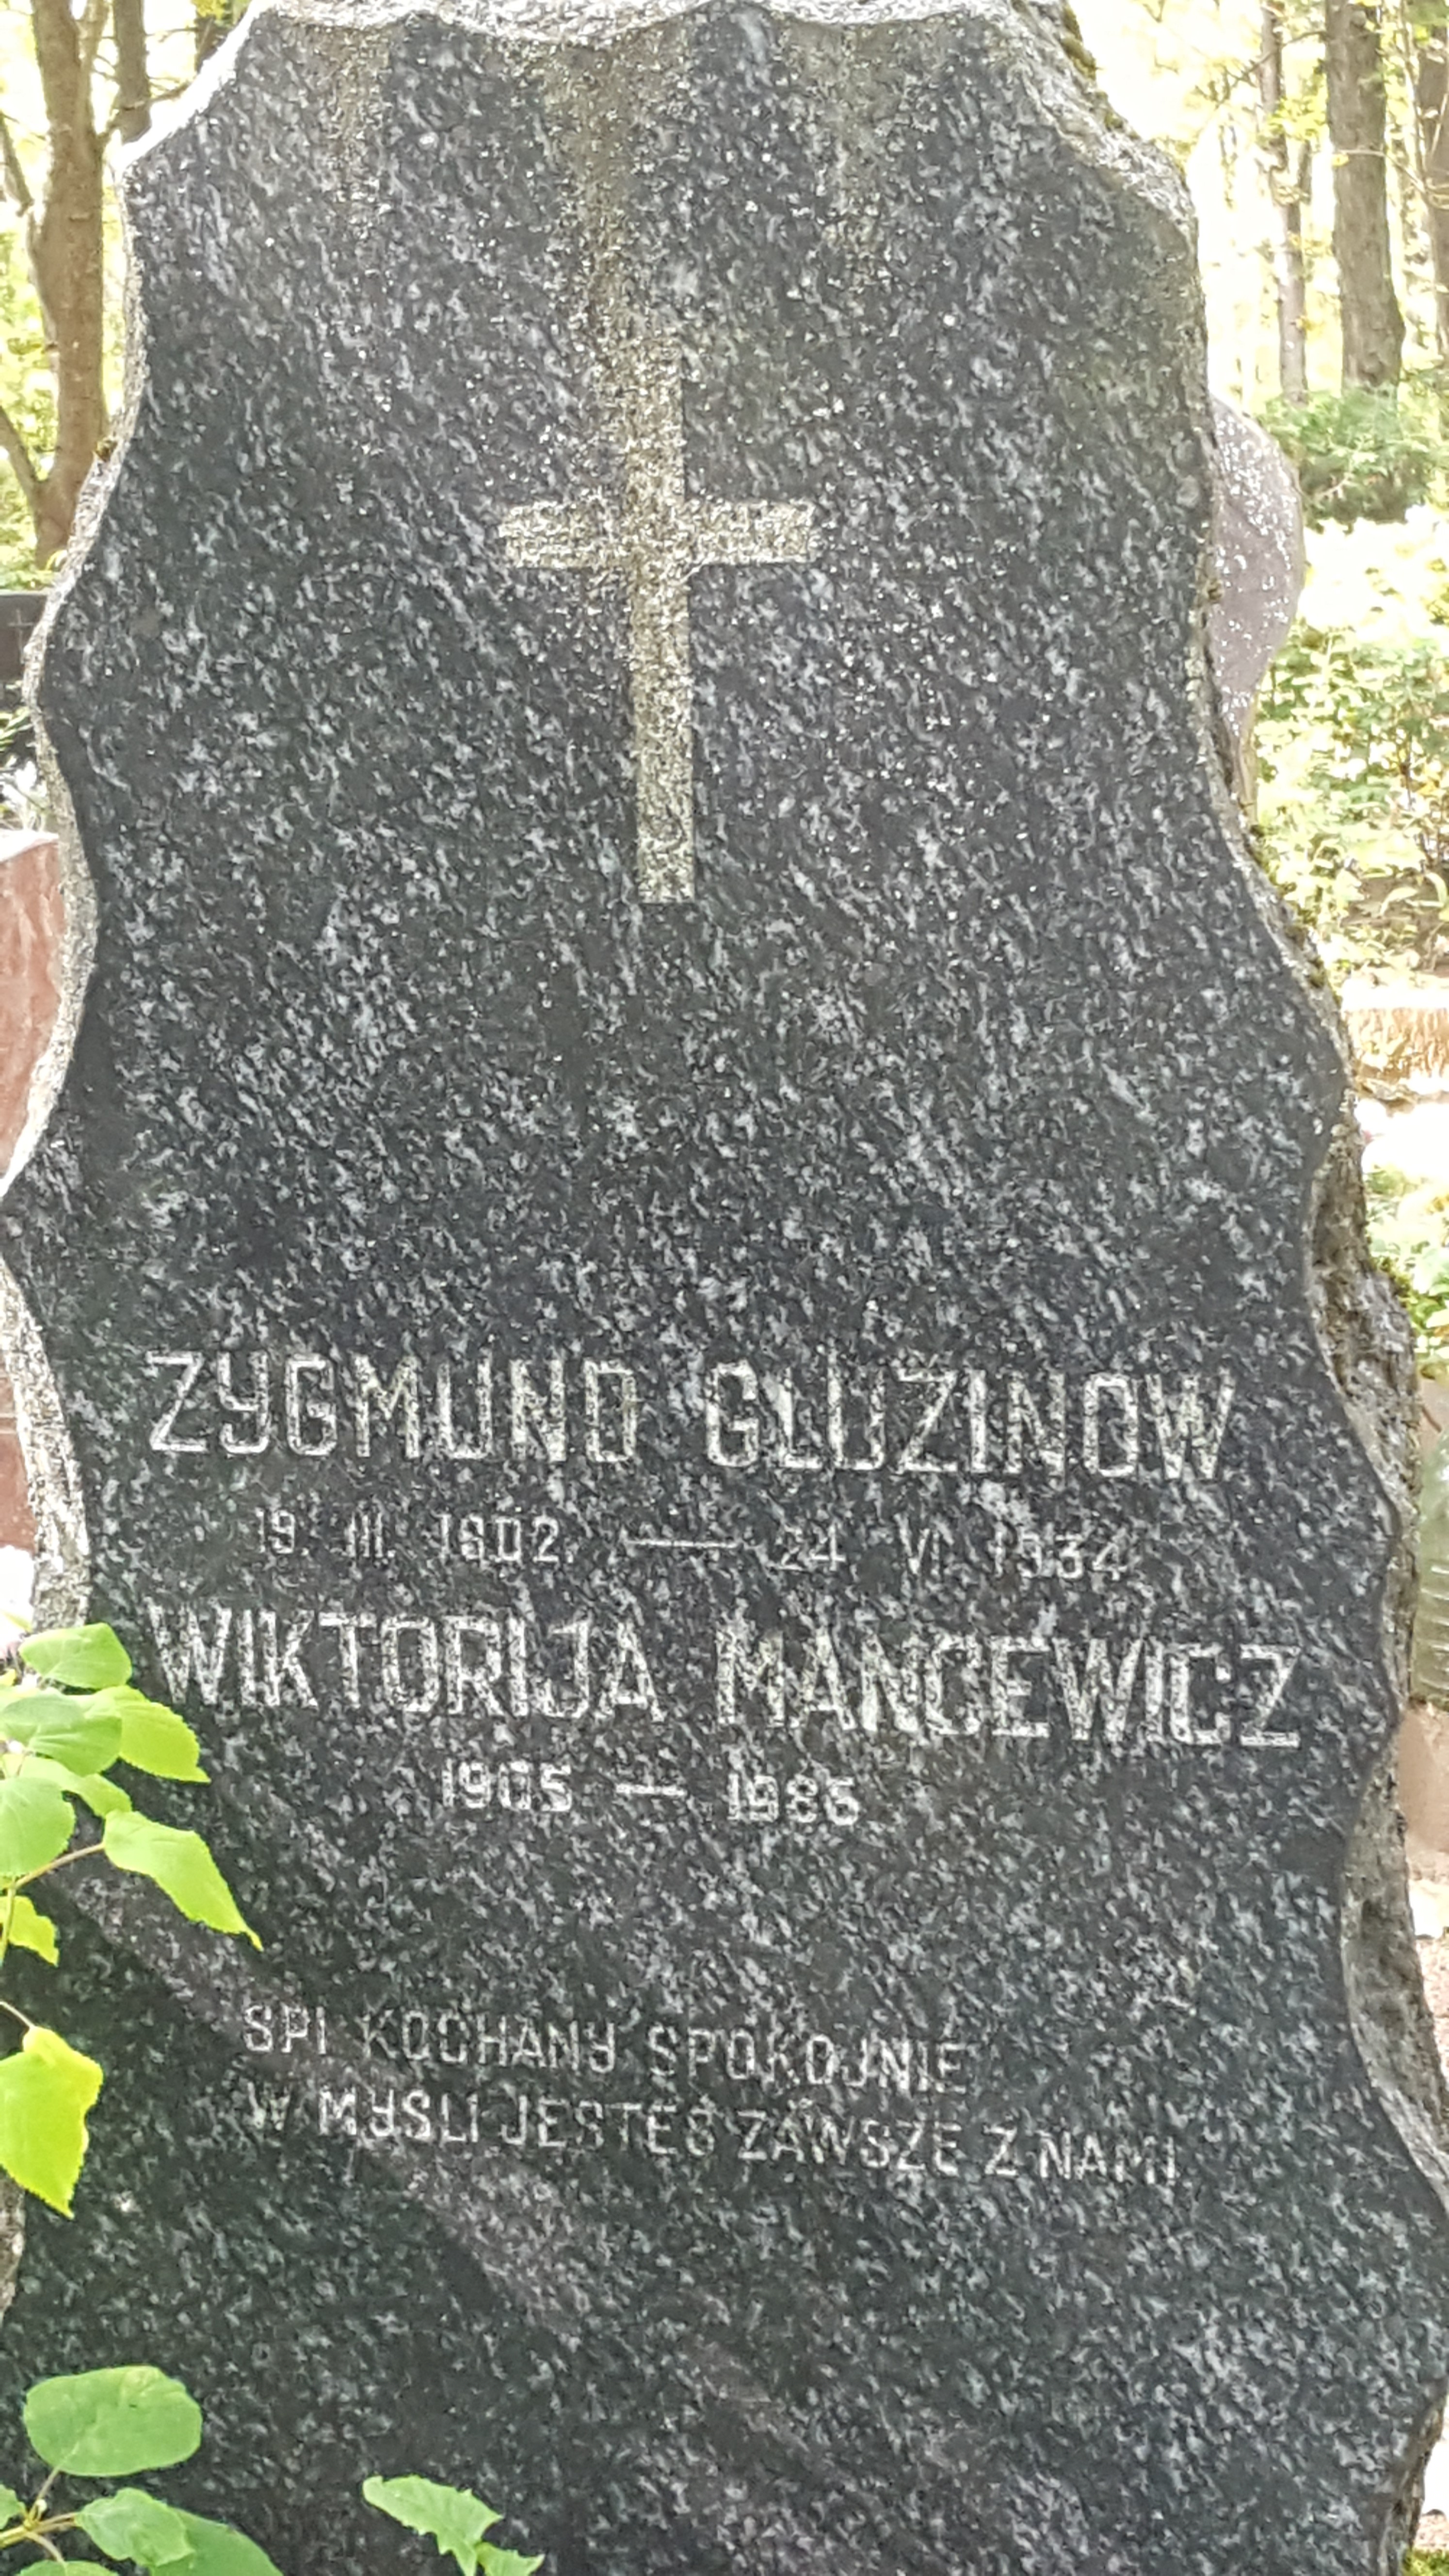 Inscription from the tombstone of Sigmund Gluzinov and Viktoria Mancevich, St Michael's cemetery in Riga, as of 2021.